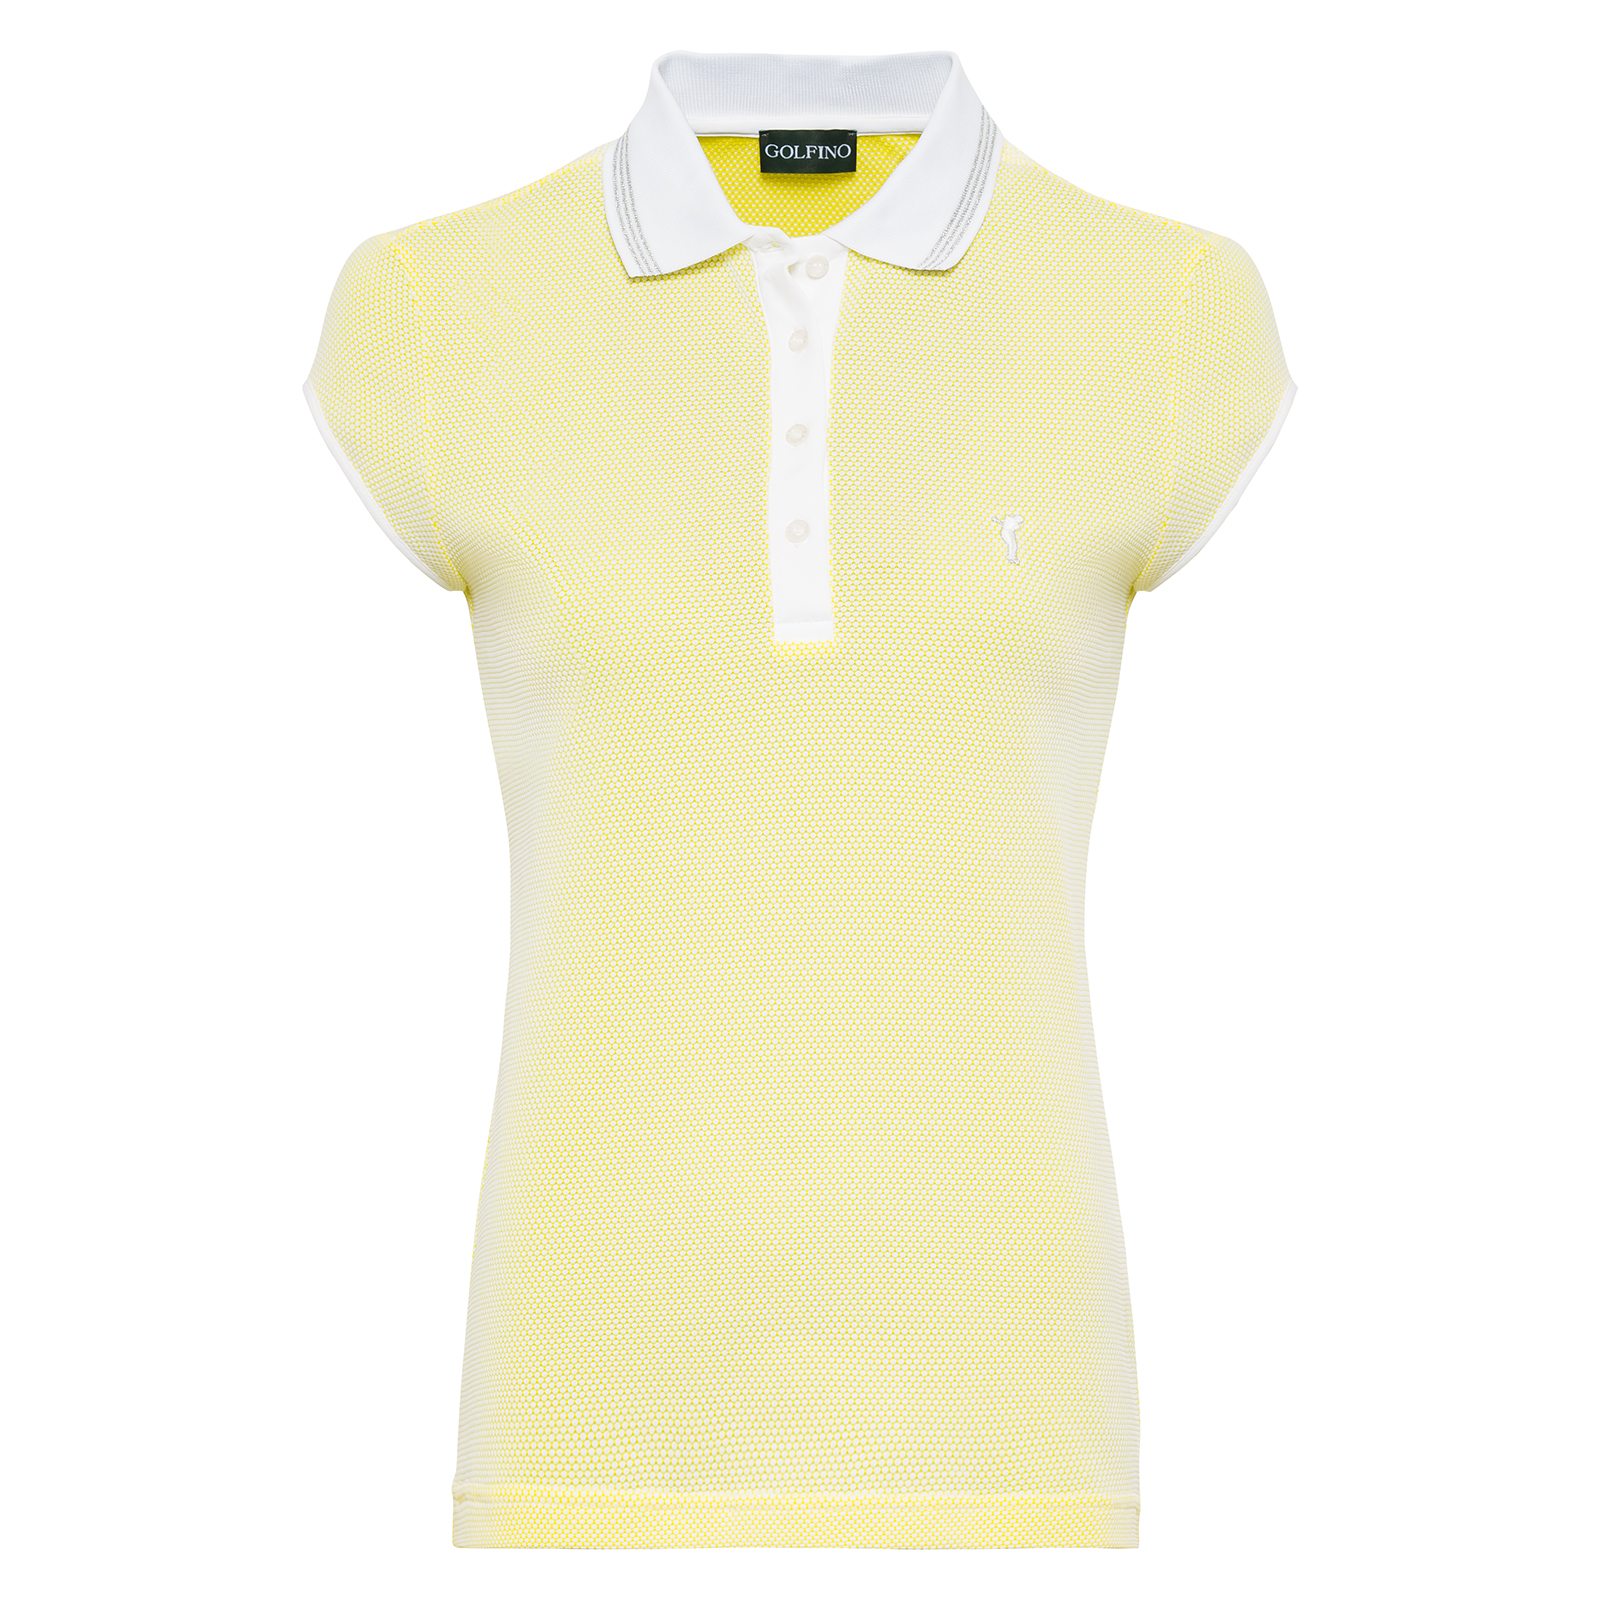 Ladies' golf polo shirt with cap sleeves, made from high quality bubble Jacquard fabric